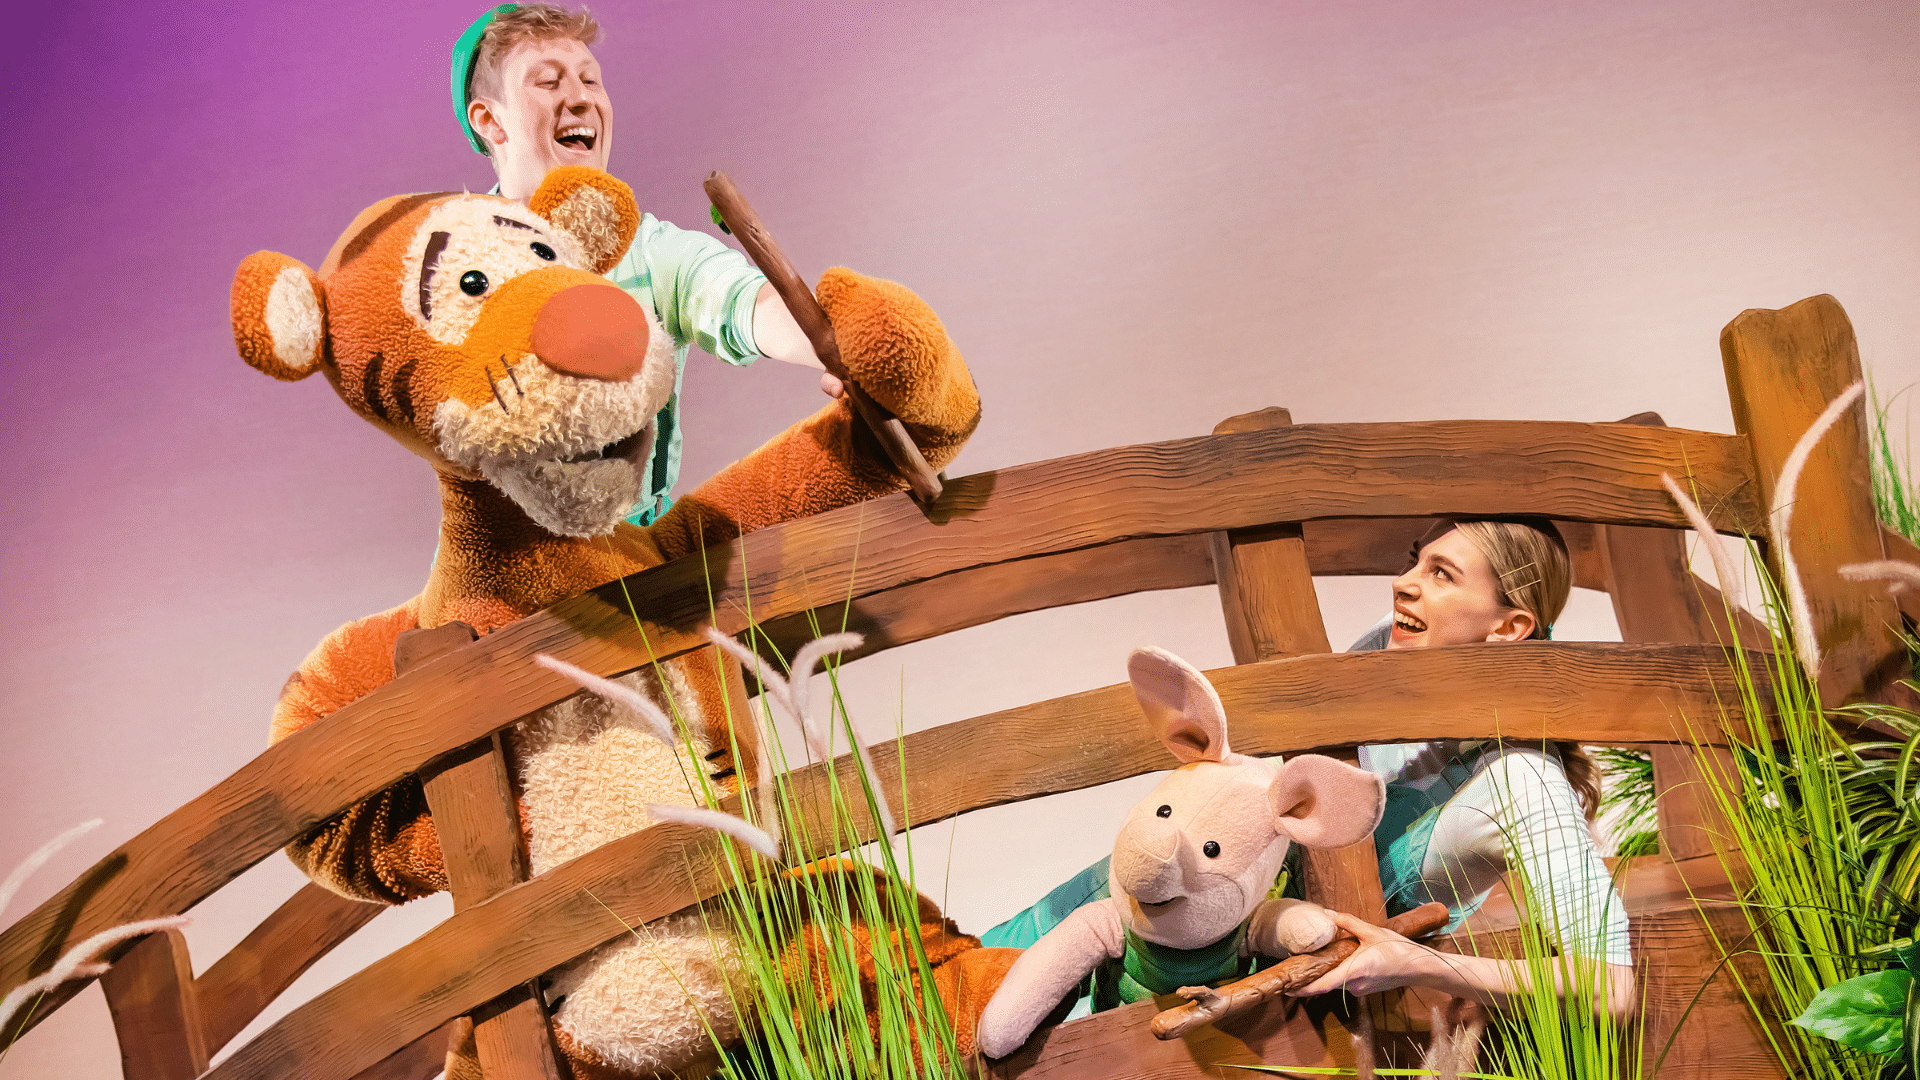 Disney's Winnie the Pooh production photo - Tigger and Piglet puppets in a wooden bridge above a blue stream with green reeds sprouting from the water. Tigger leans over the top of the bridge with a wooden stick in their hand. Piglet peeks out from the bottom of the bridge, also holding a stick. Two actors operate the puppets.